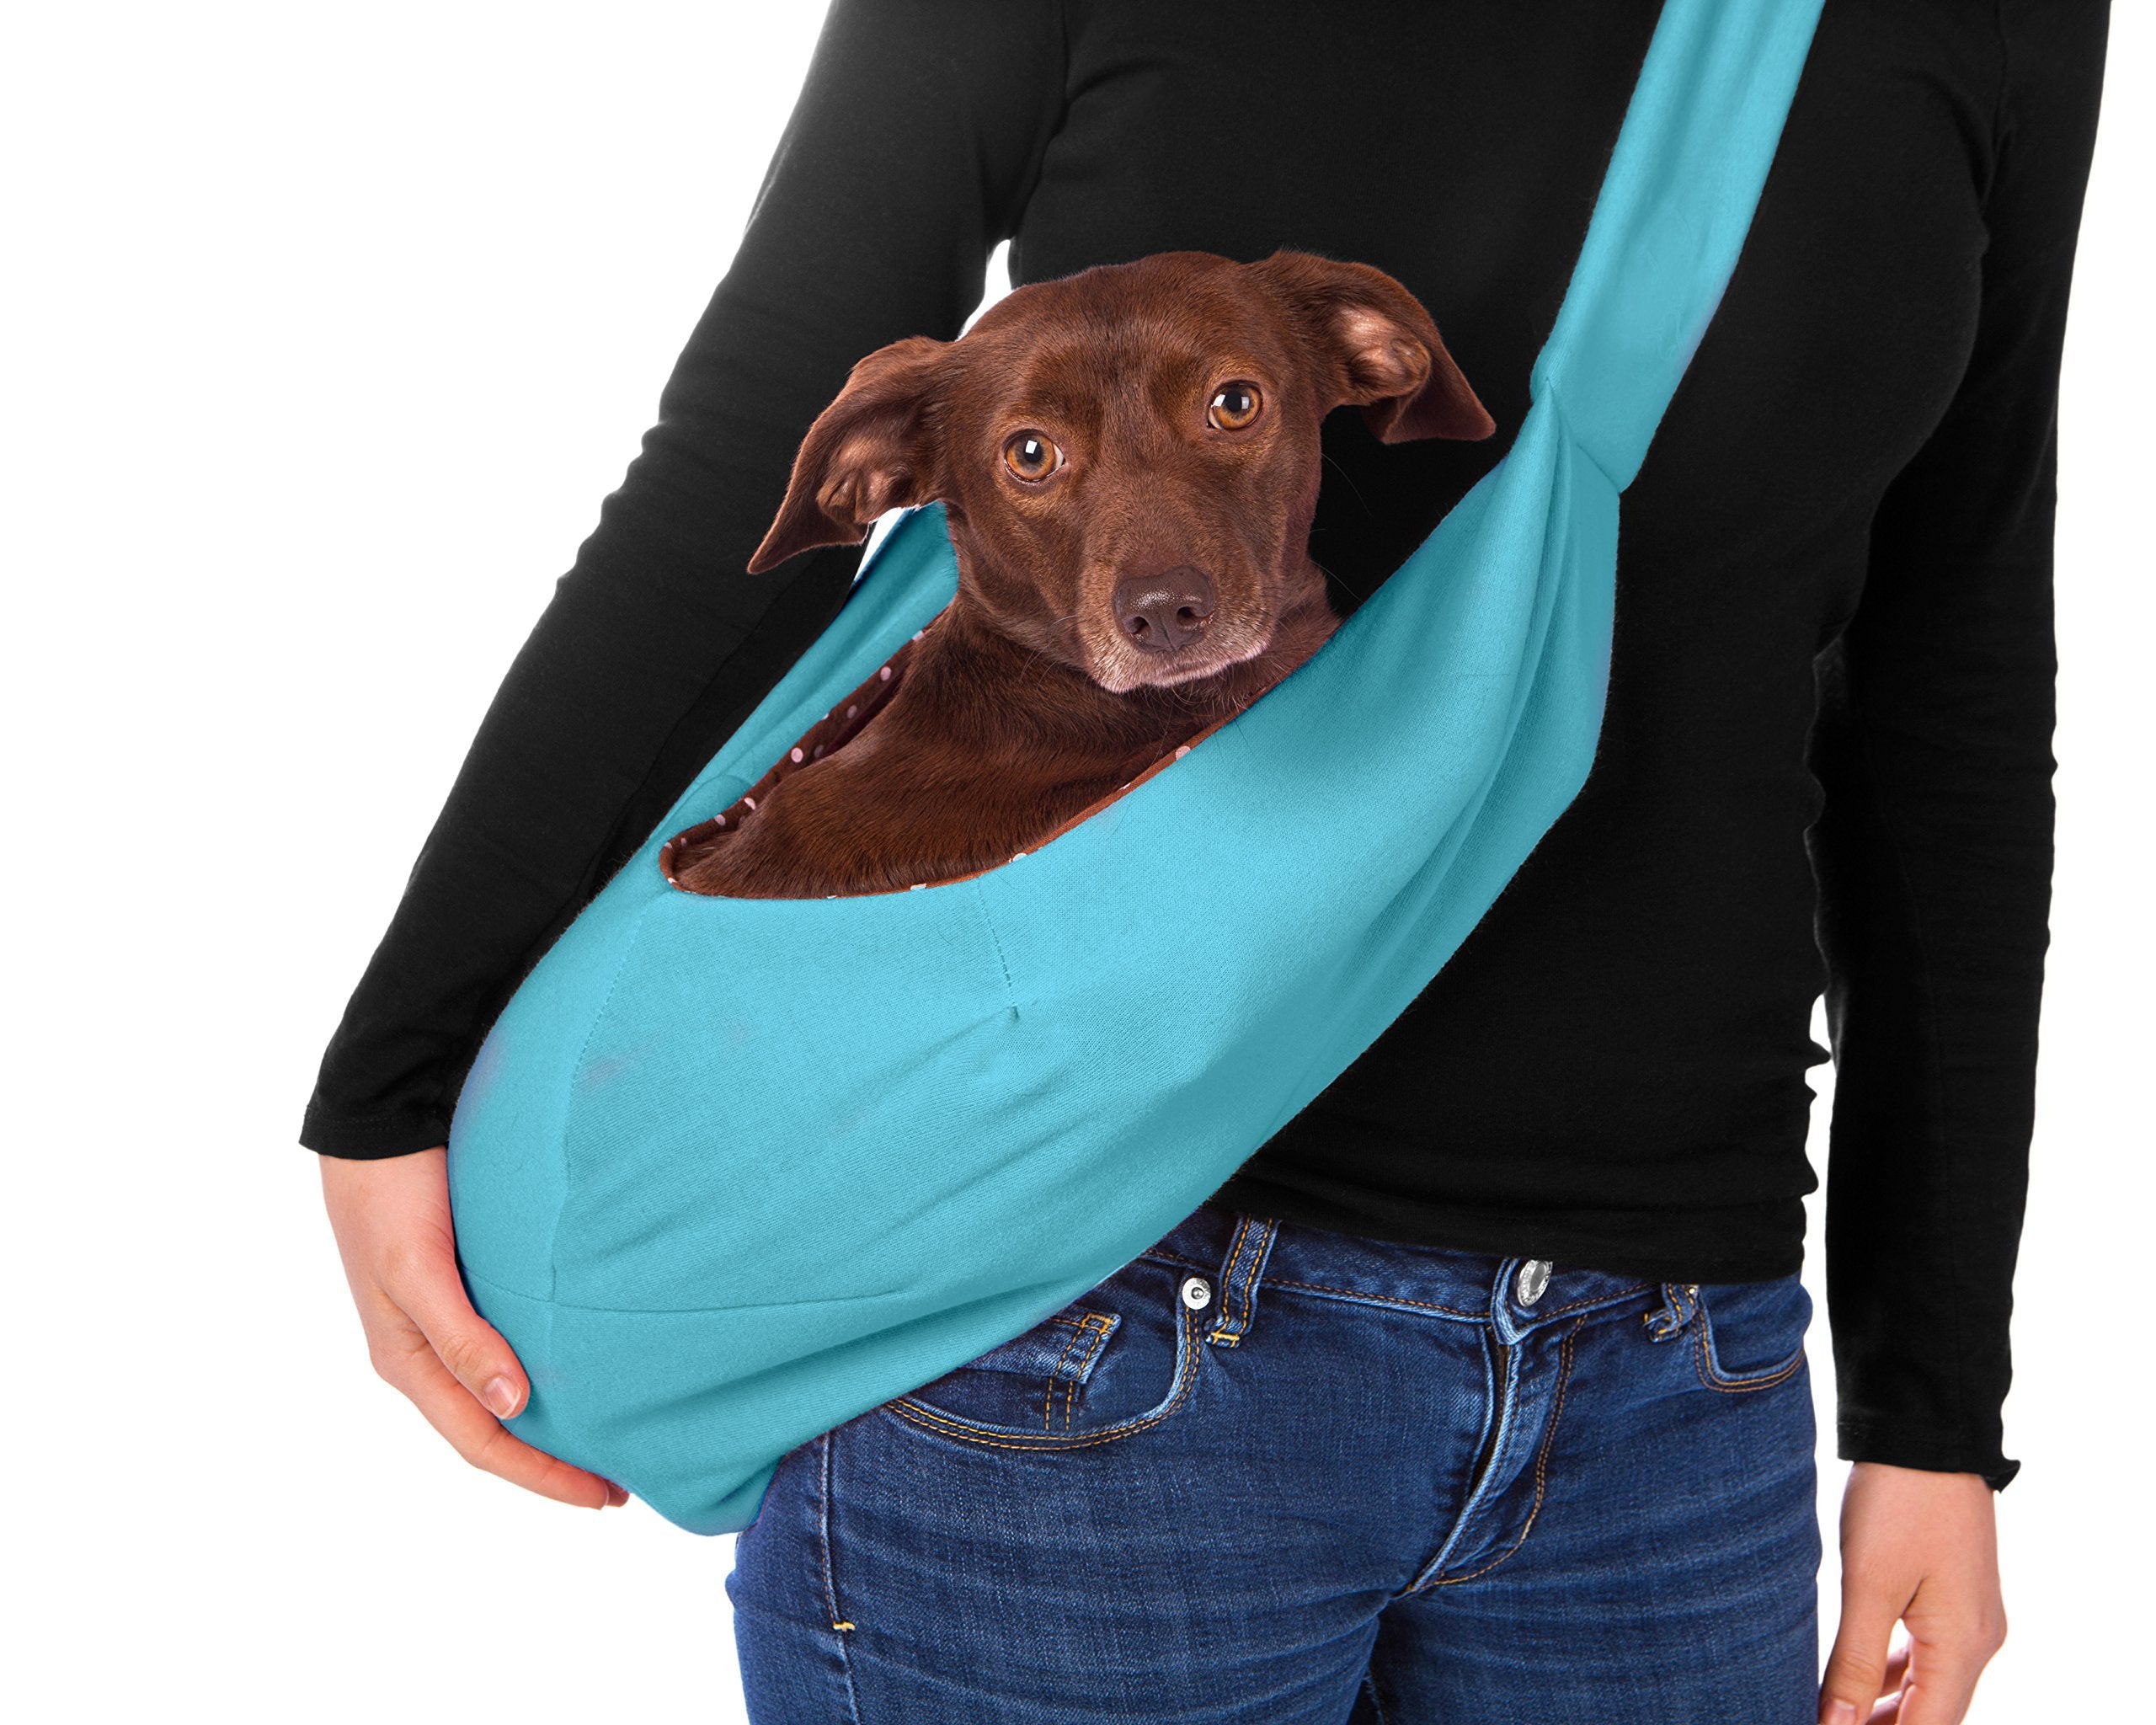 iPrimio Dog and Cat Sling Carrier Hands Free Reversible Pet Papoose Orange Bag - Soft Pouch and Tote Design, Suitable for Puppy, Small Dogs, and Cats for Outdoor Travel